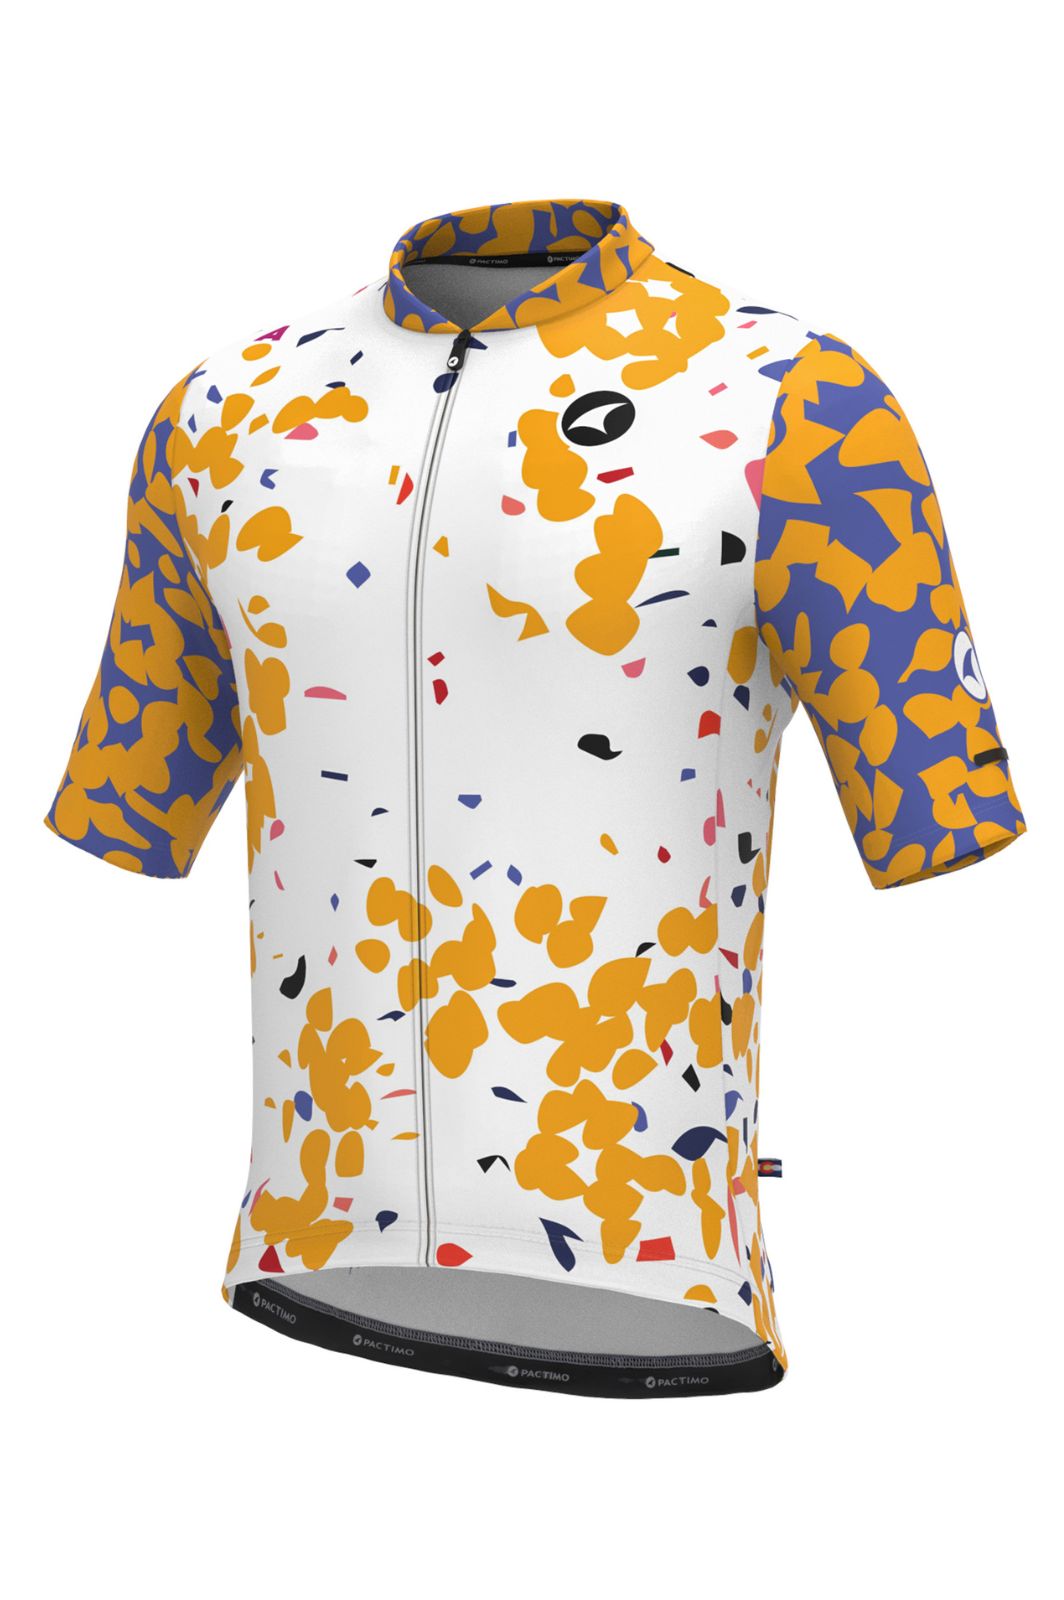 Unique Cycling Jerseys - Men's Quaking Aspen by Mariery Young